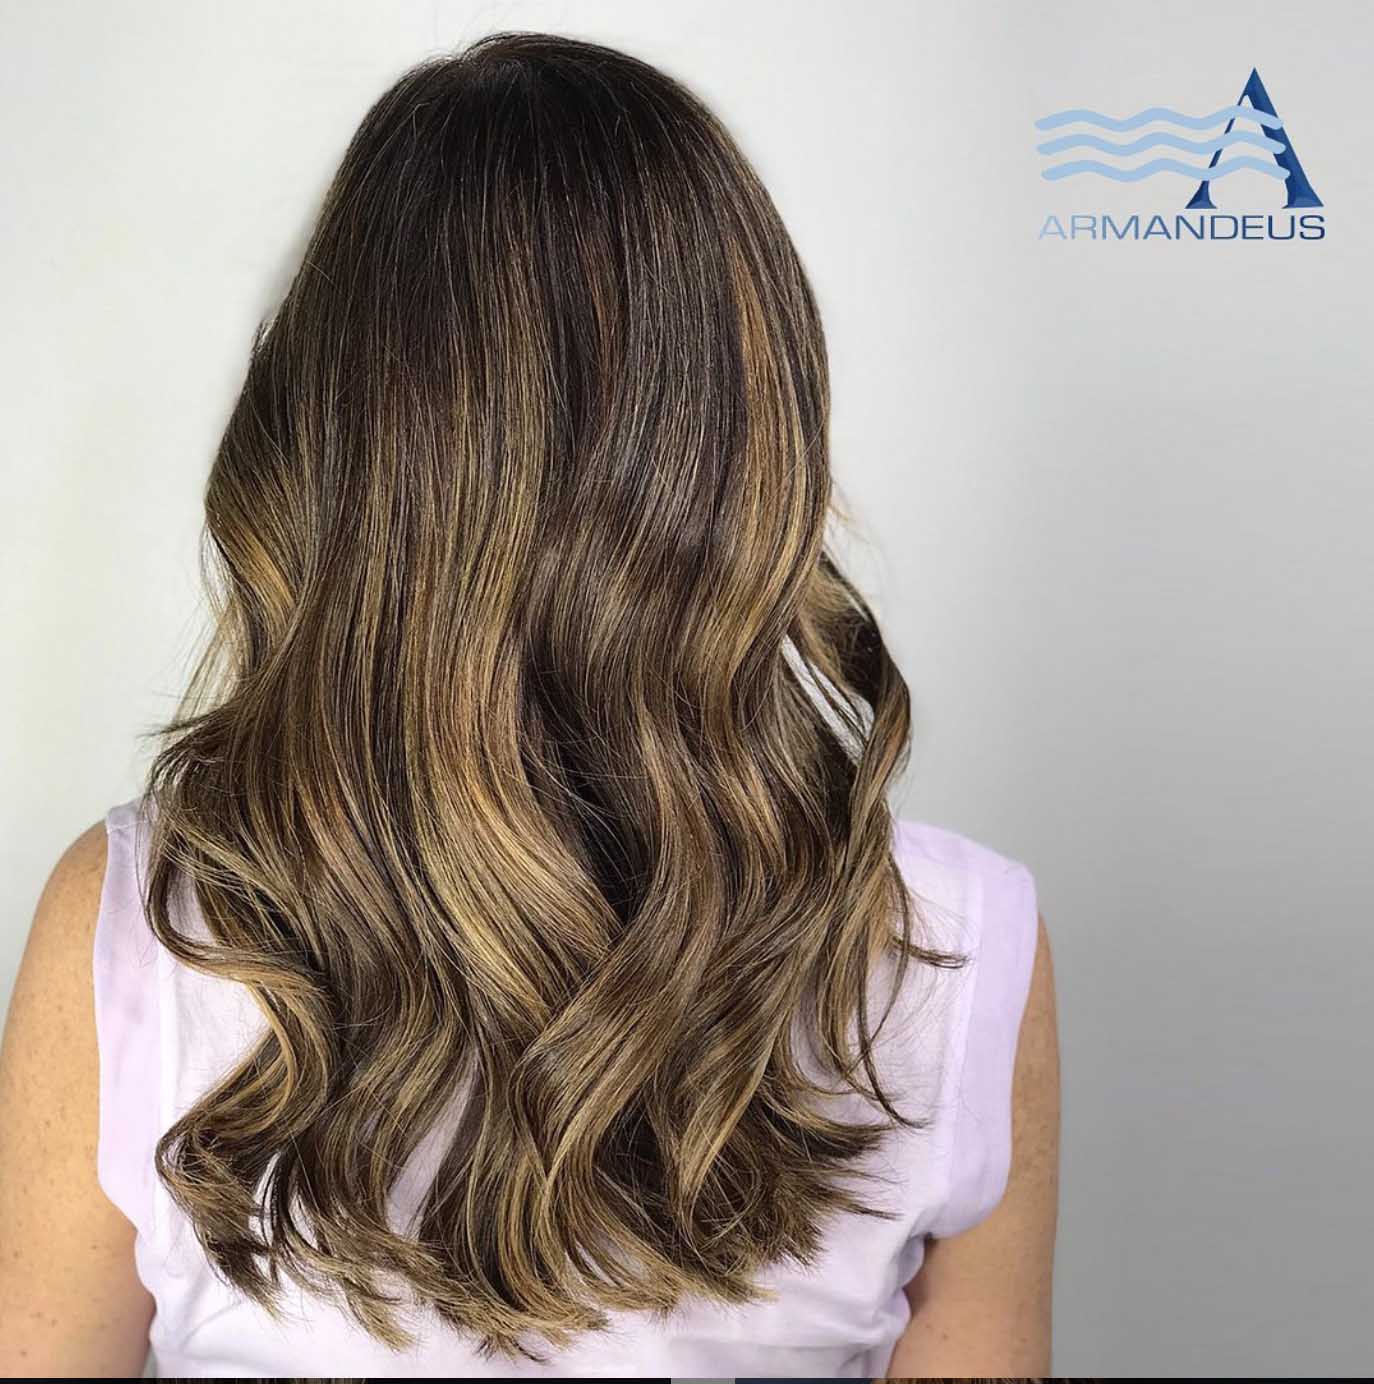 Highlights and hairstyle done at Salon Armandeus Doral